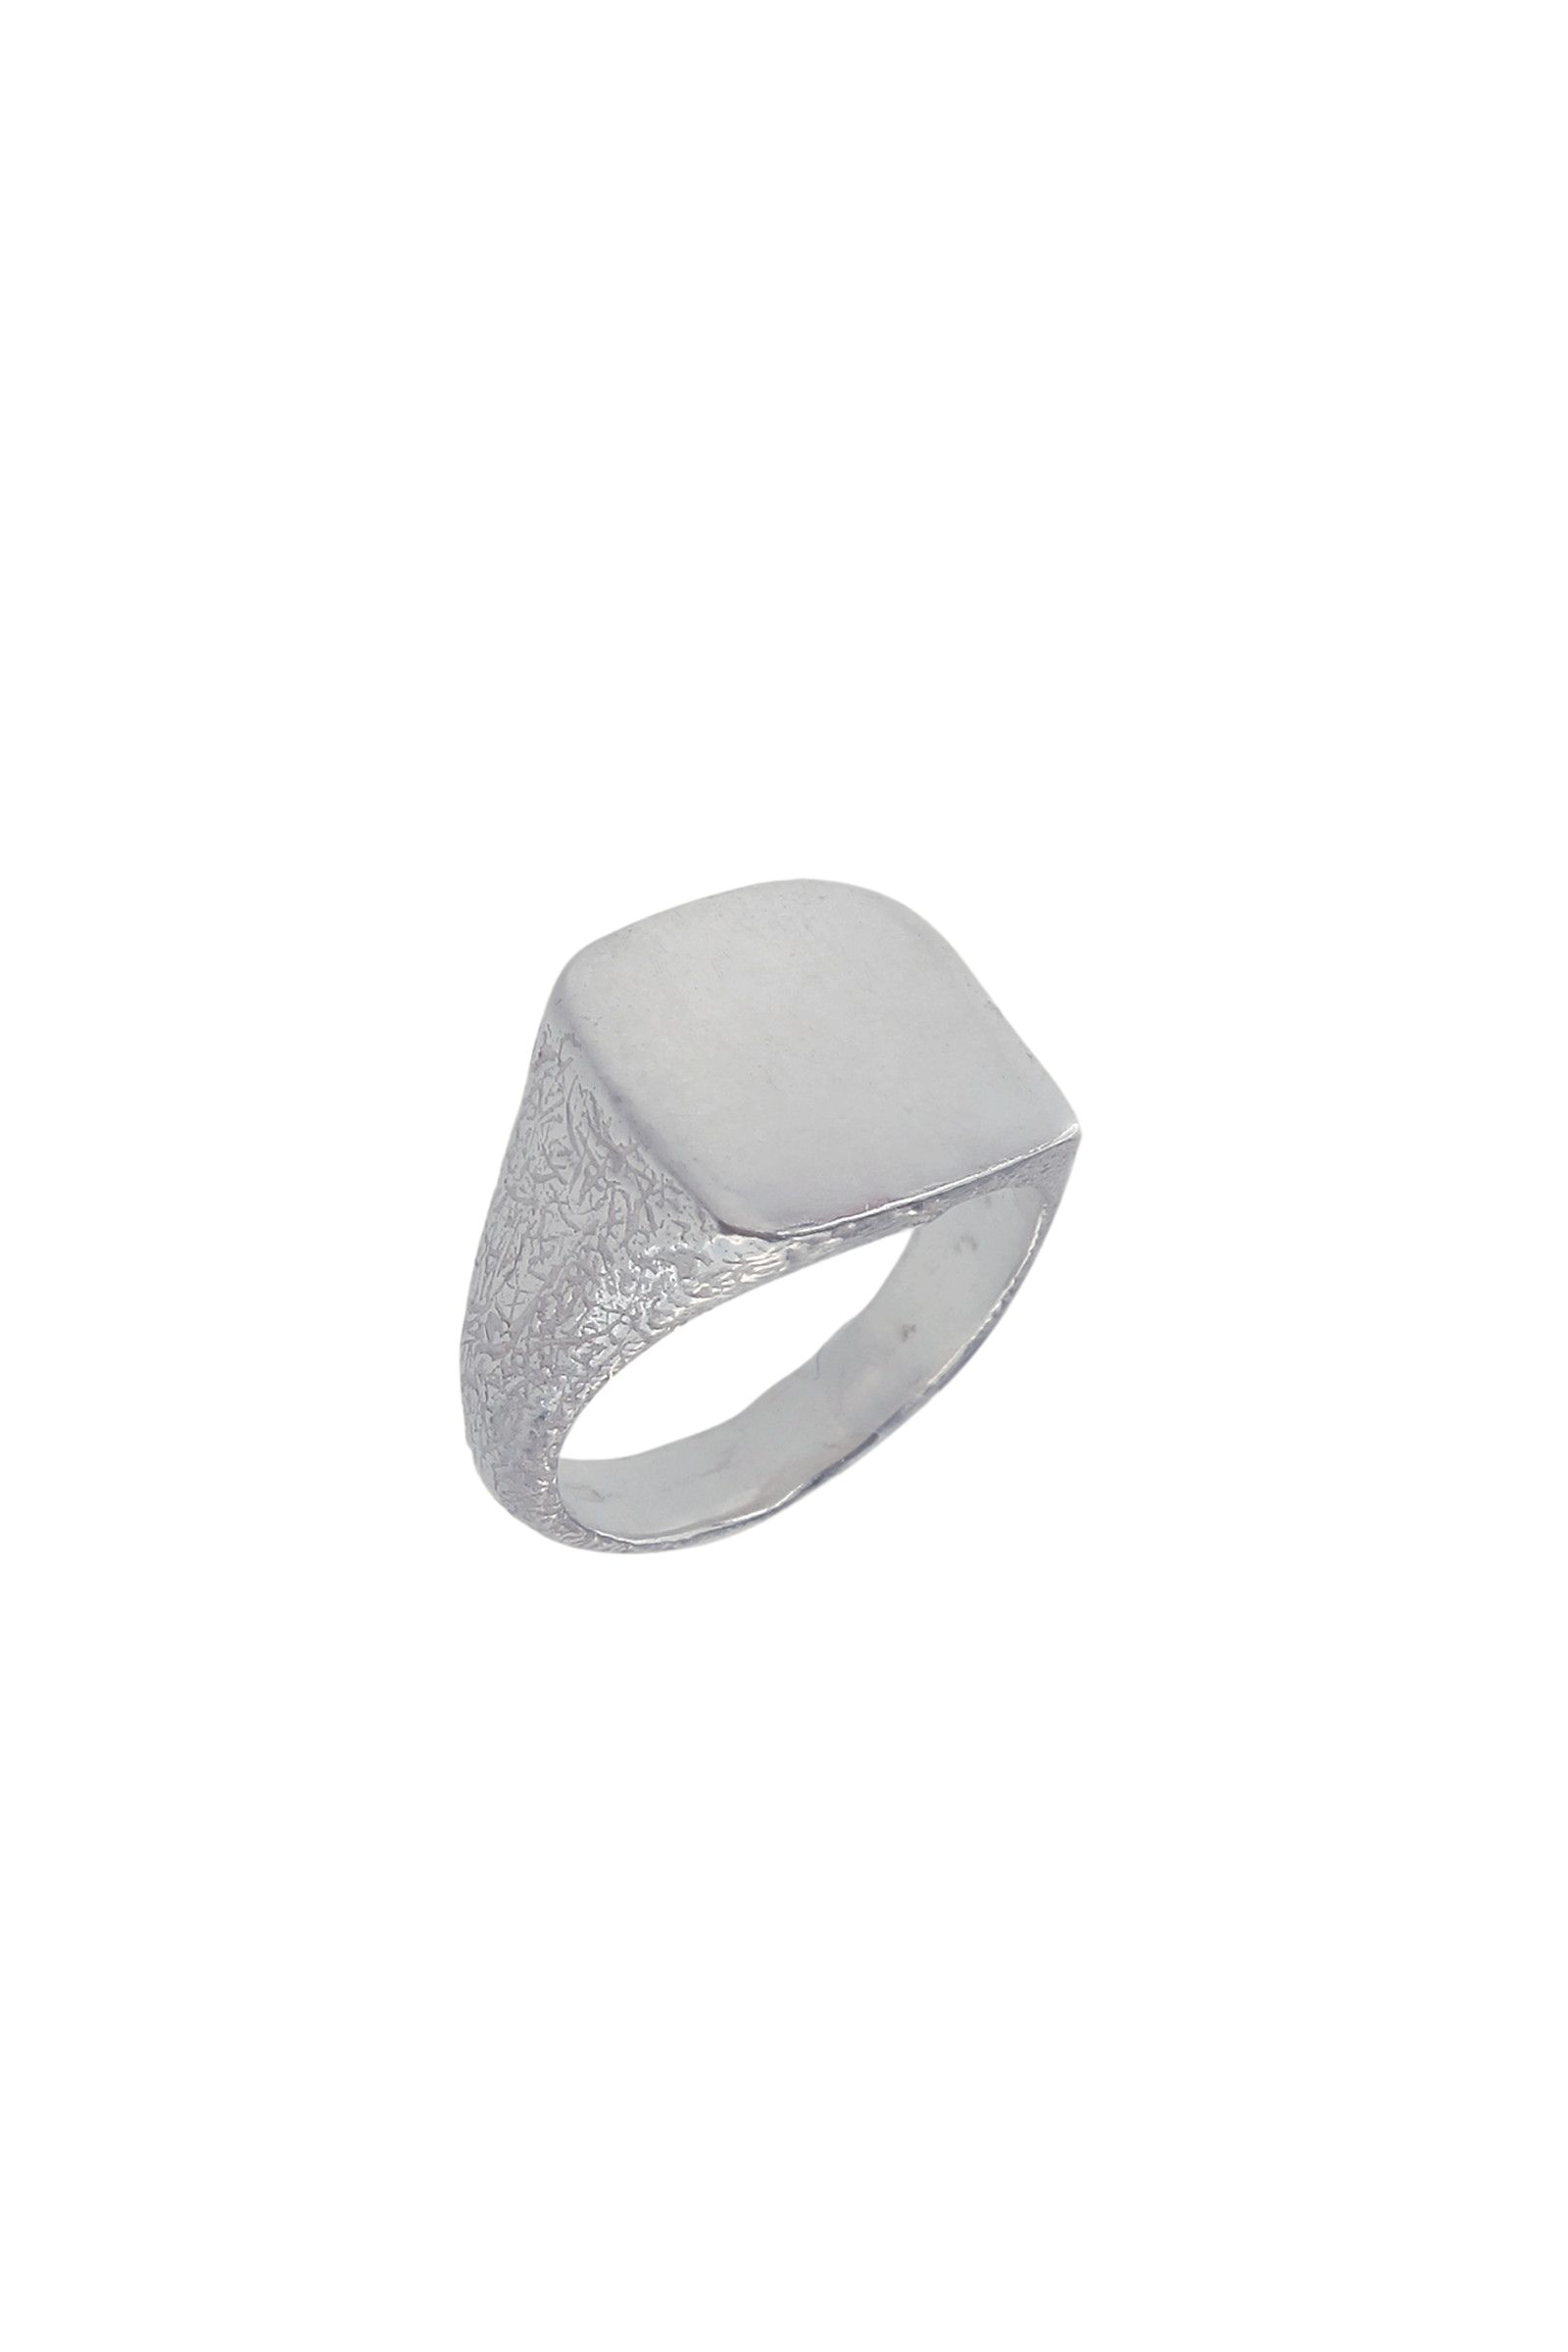 AEXX6-Sterling-Silver-925-Square-Signet-Ring-1